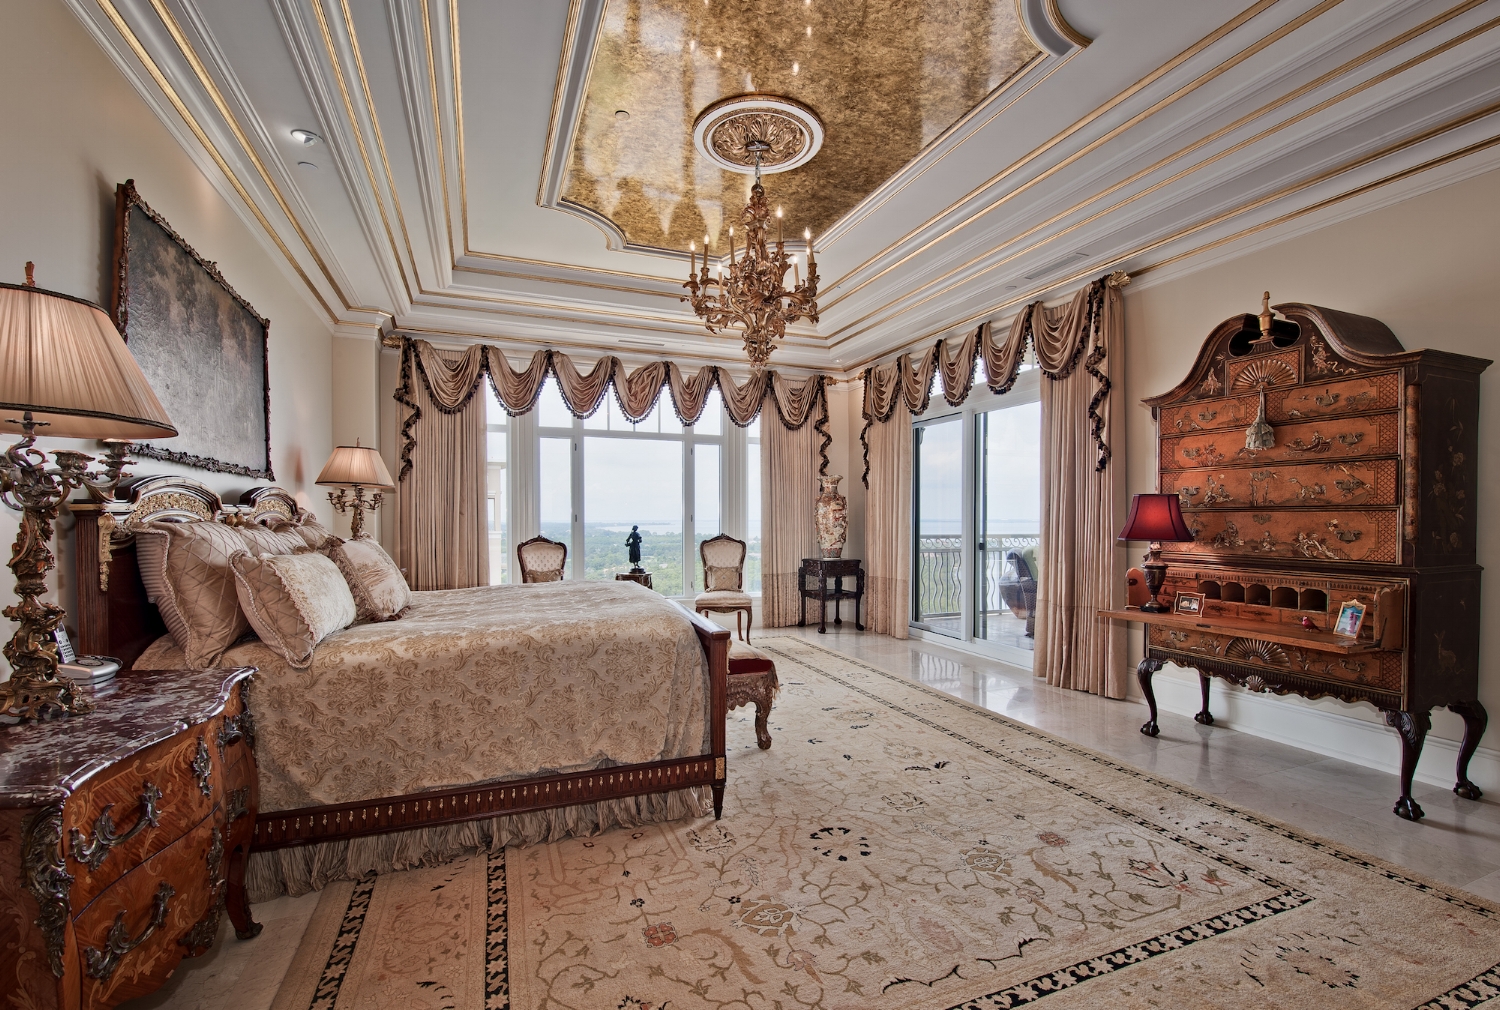  In this master bedroom the crown molding was gilded in selected areas and antiqued with a glaze. The ceiling was gilded and decoratively glazed. 